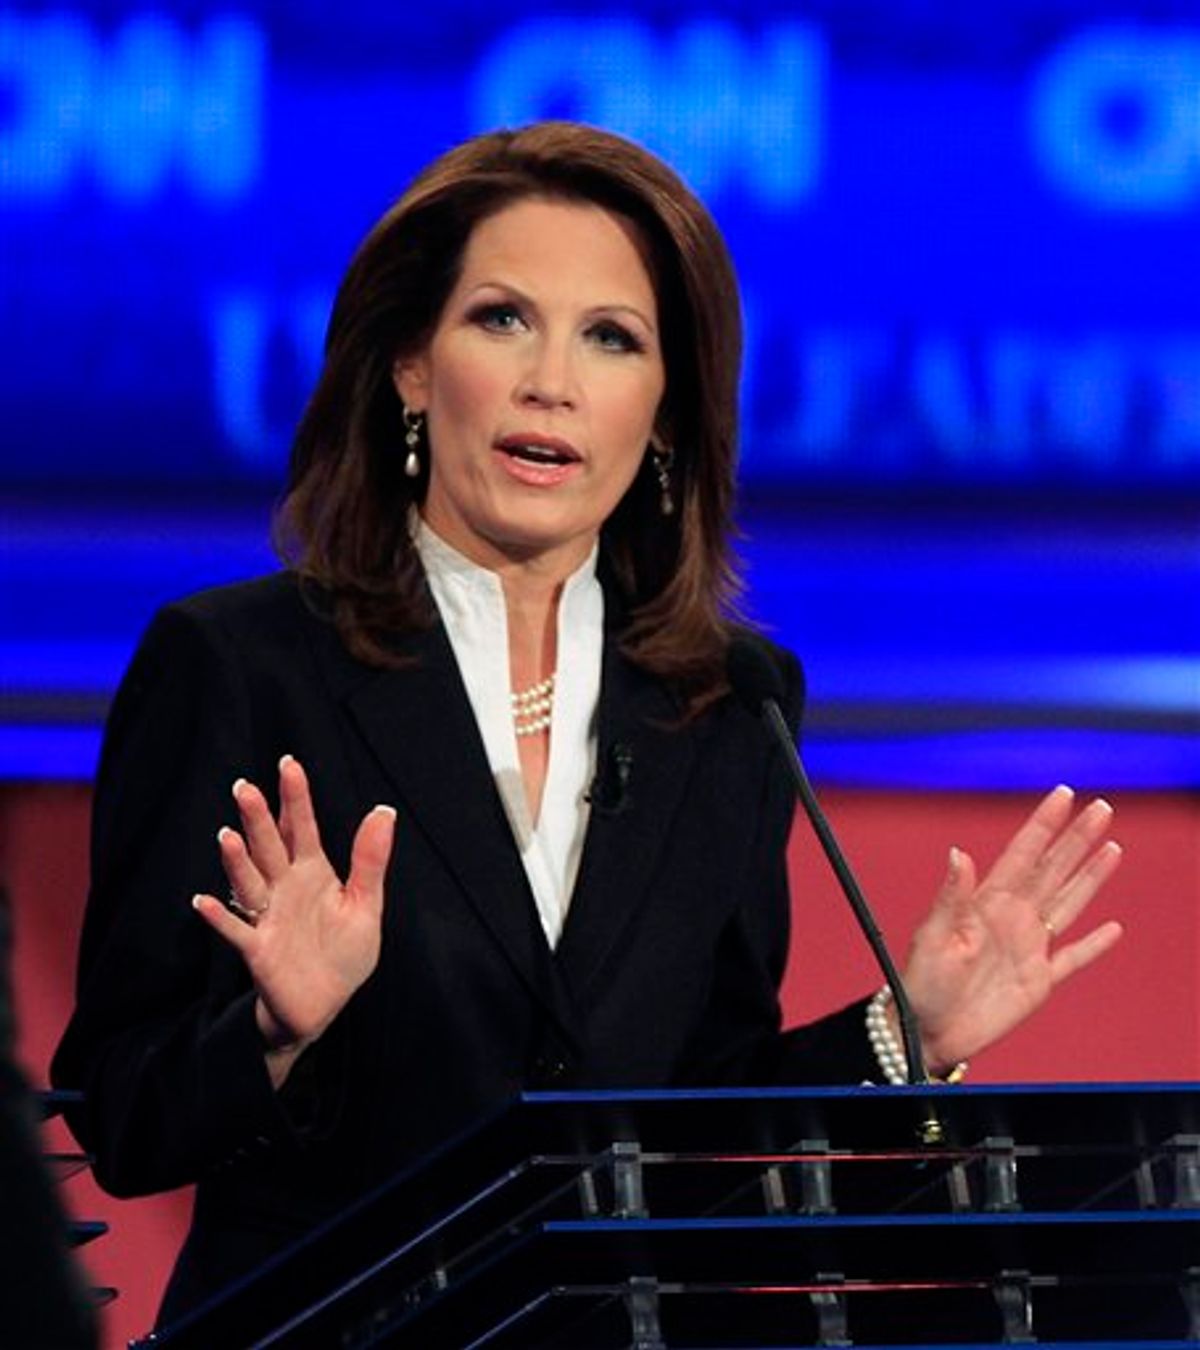 Rep. Michele Bachmann, R-Minn., answers a question during the first New Hampshire Republican presidential debate at St. Anselm College in Manchester, N.H., Monday, June 13, 2011. (AP Photo/Jim Cole) (AP)